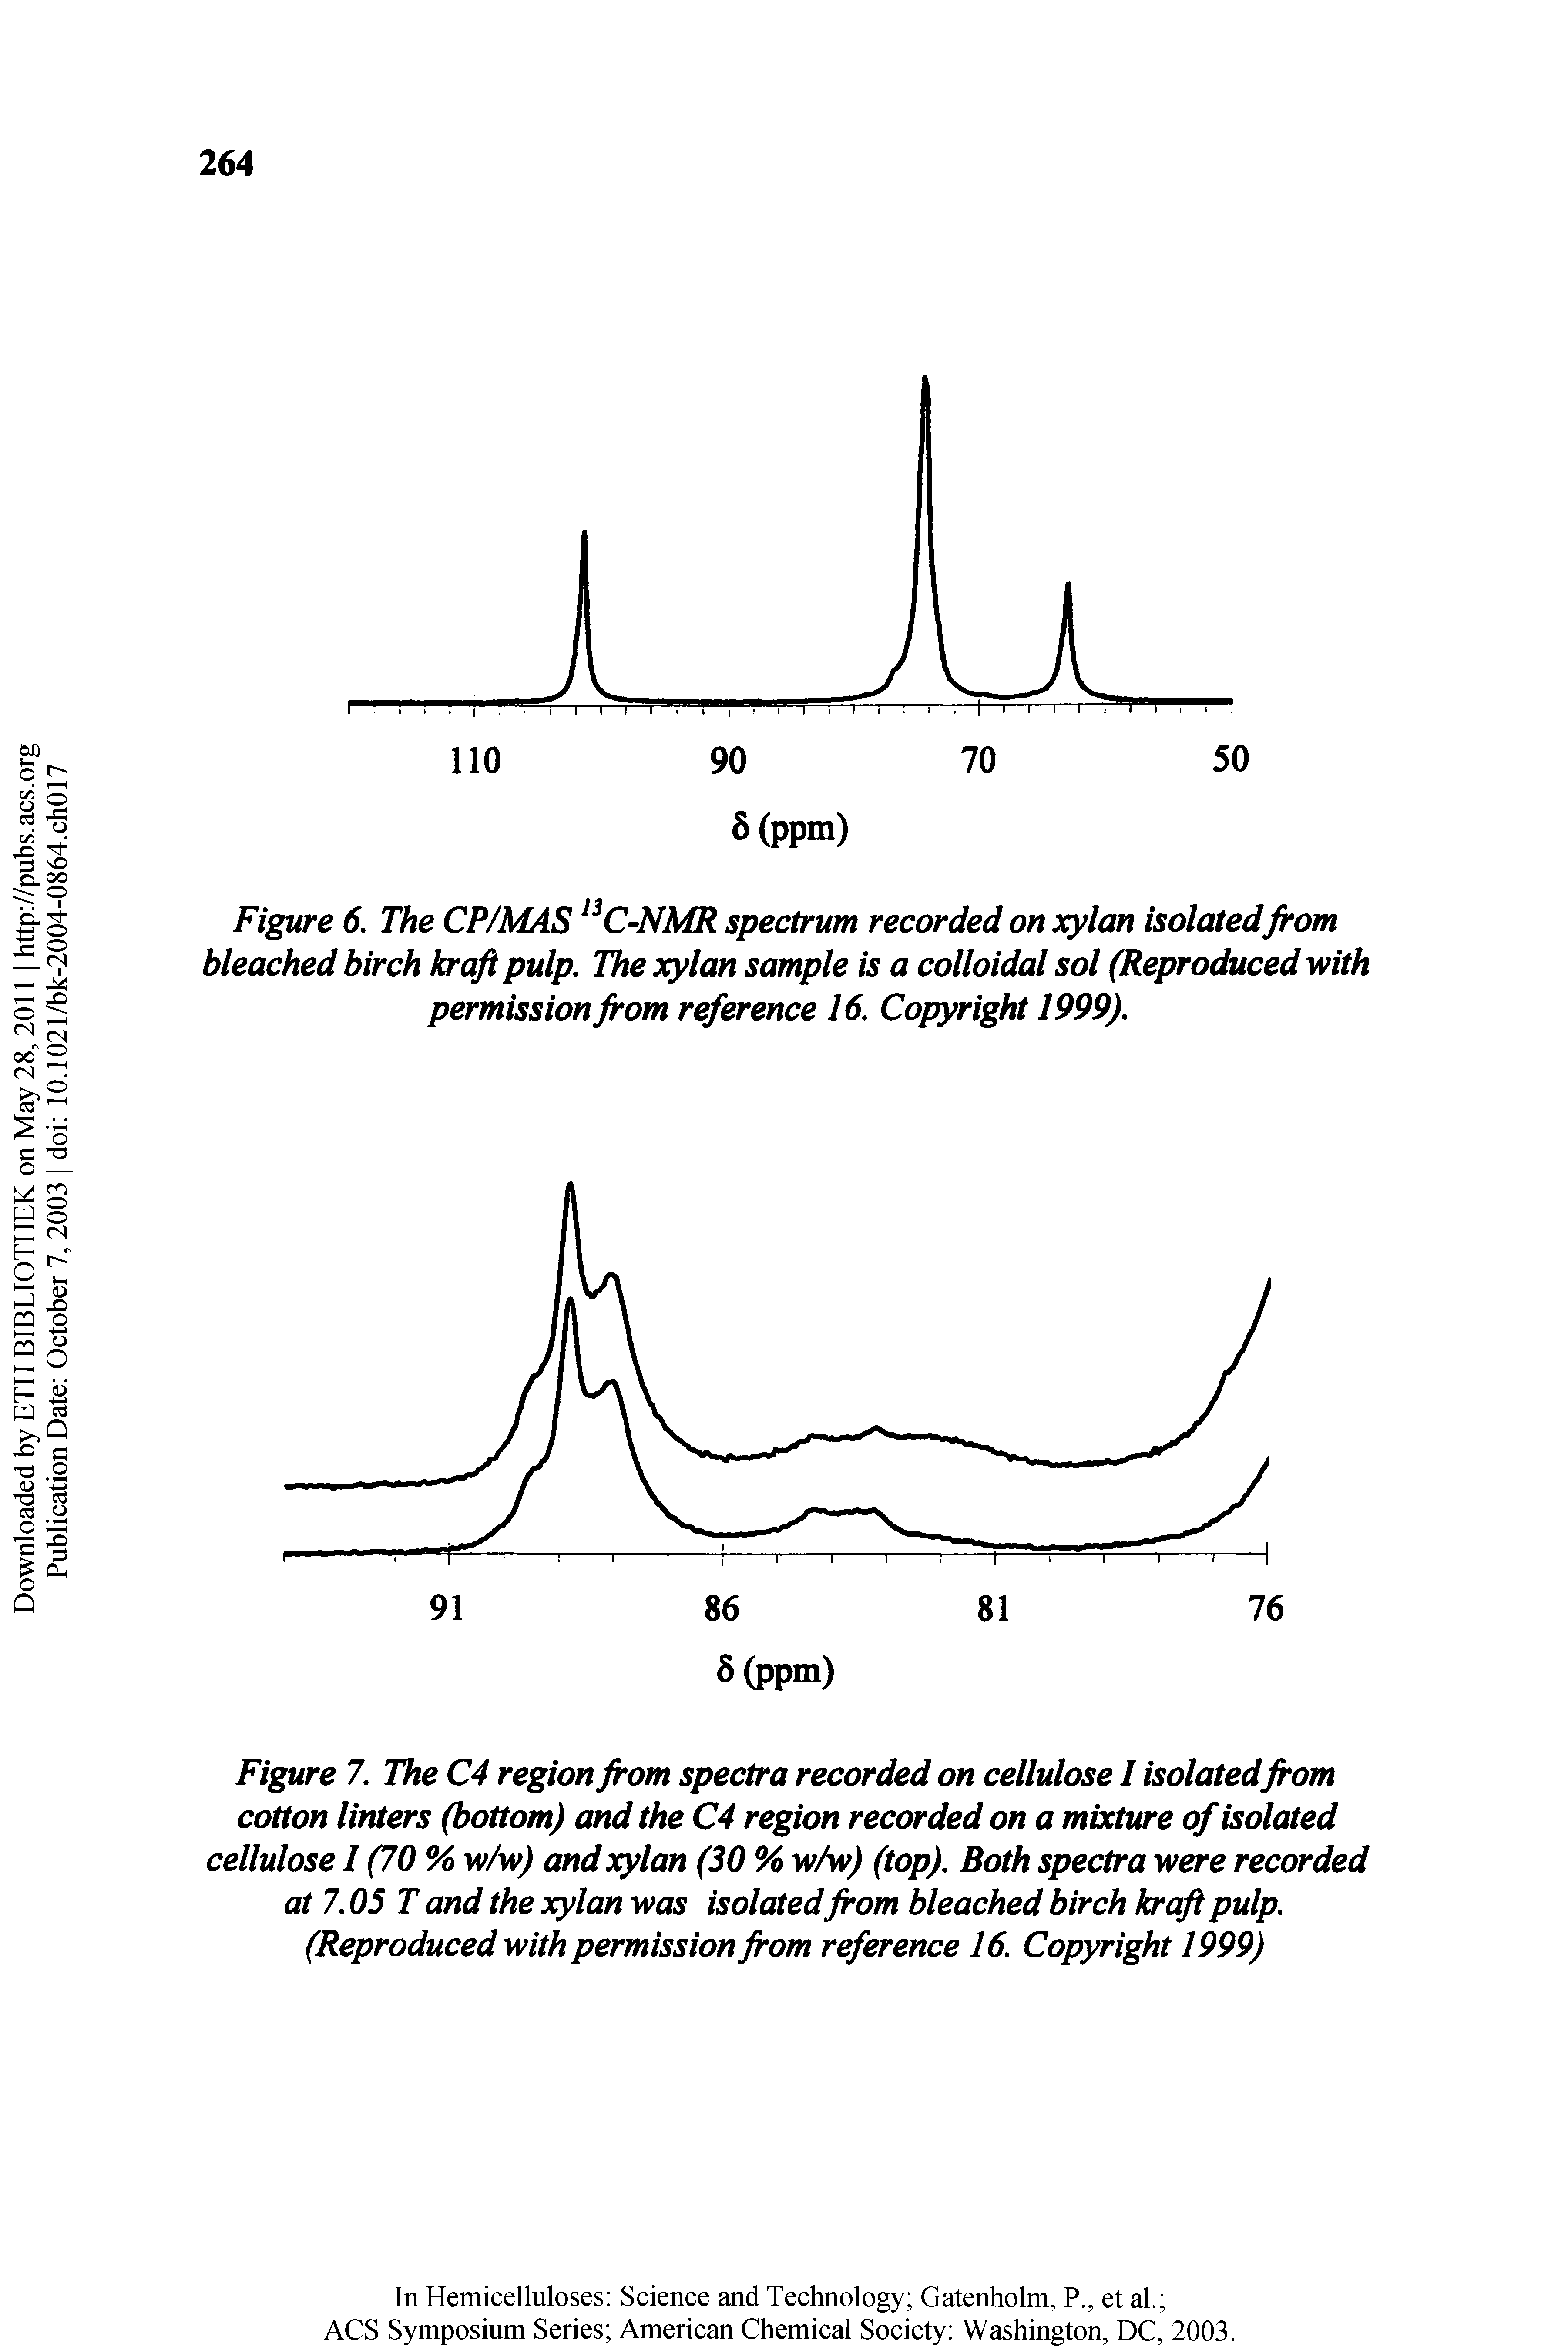 Figure 6. The CP/MAS C-NMR spectrum recorded on xylan isolated from bleached birch krqft pulp. The xylan sample is a colloidal sol (Reproduced with permission from reference 16, Copyright 1999).